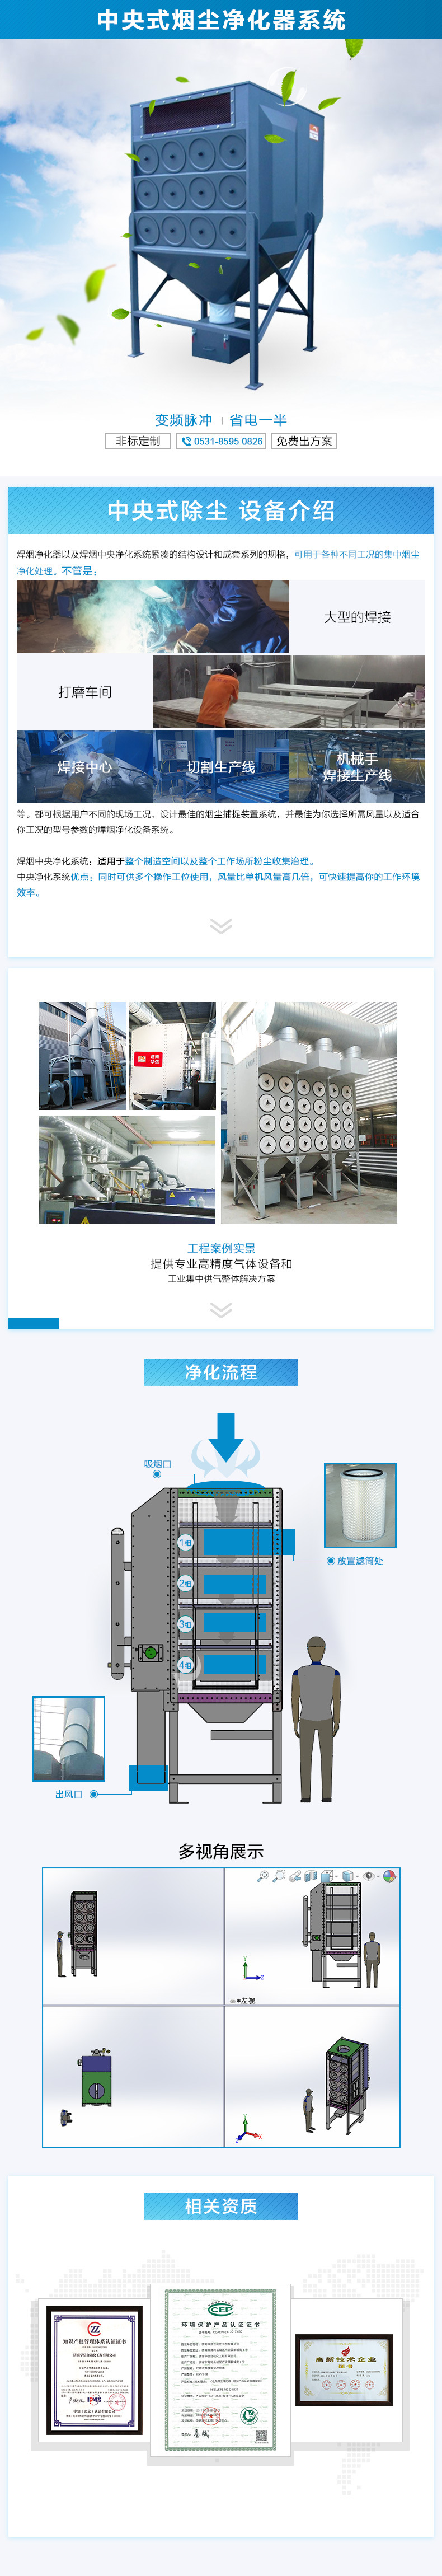 Central Integrated Type Dust Collector for Grinding and Cutting Machine